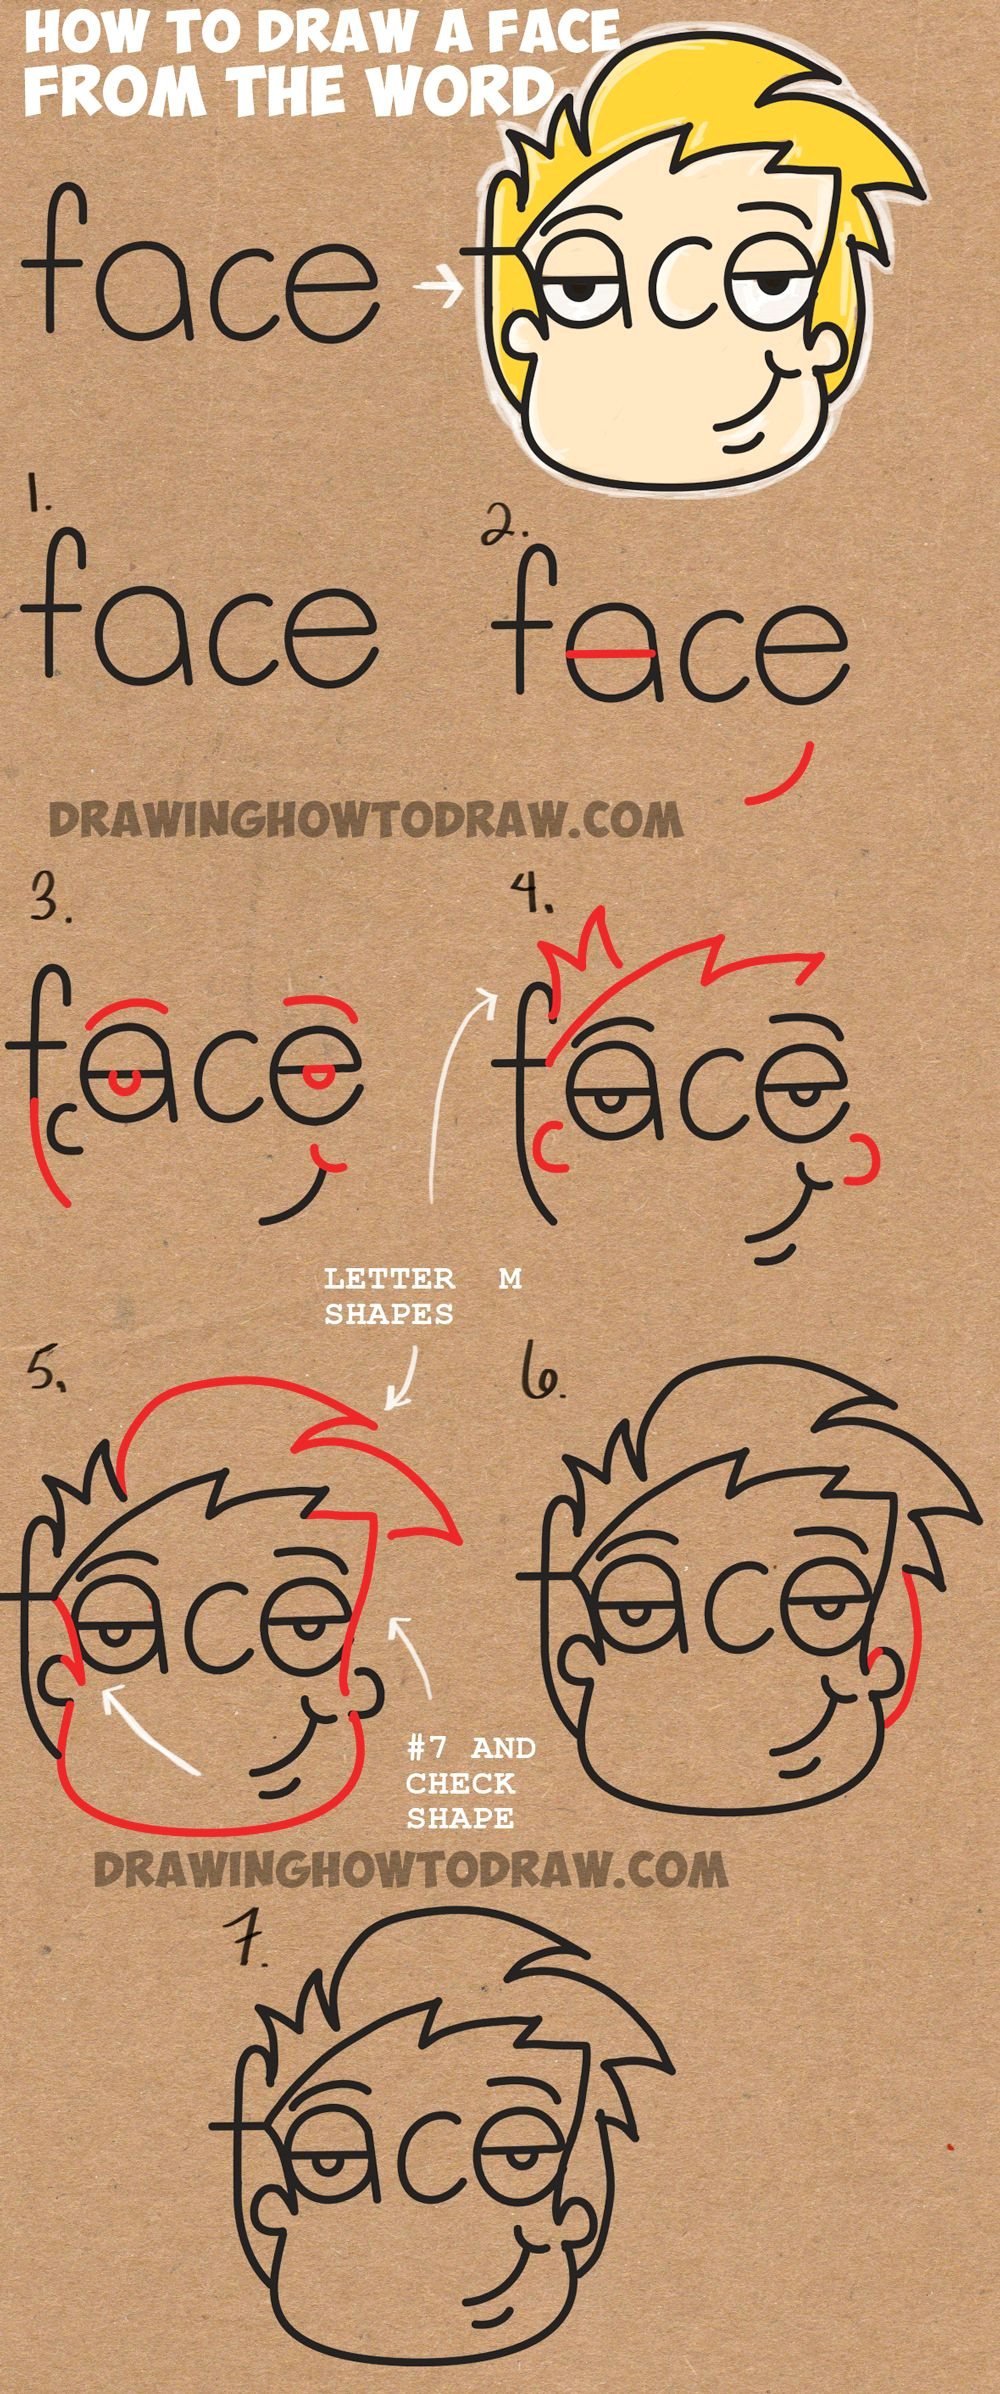 Easy Drawings with Words How to Draw Cartoon Faces From the Word Face Easy Step by Step